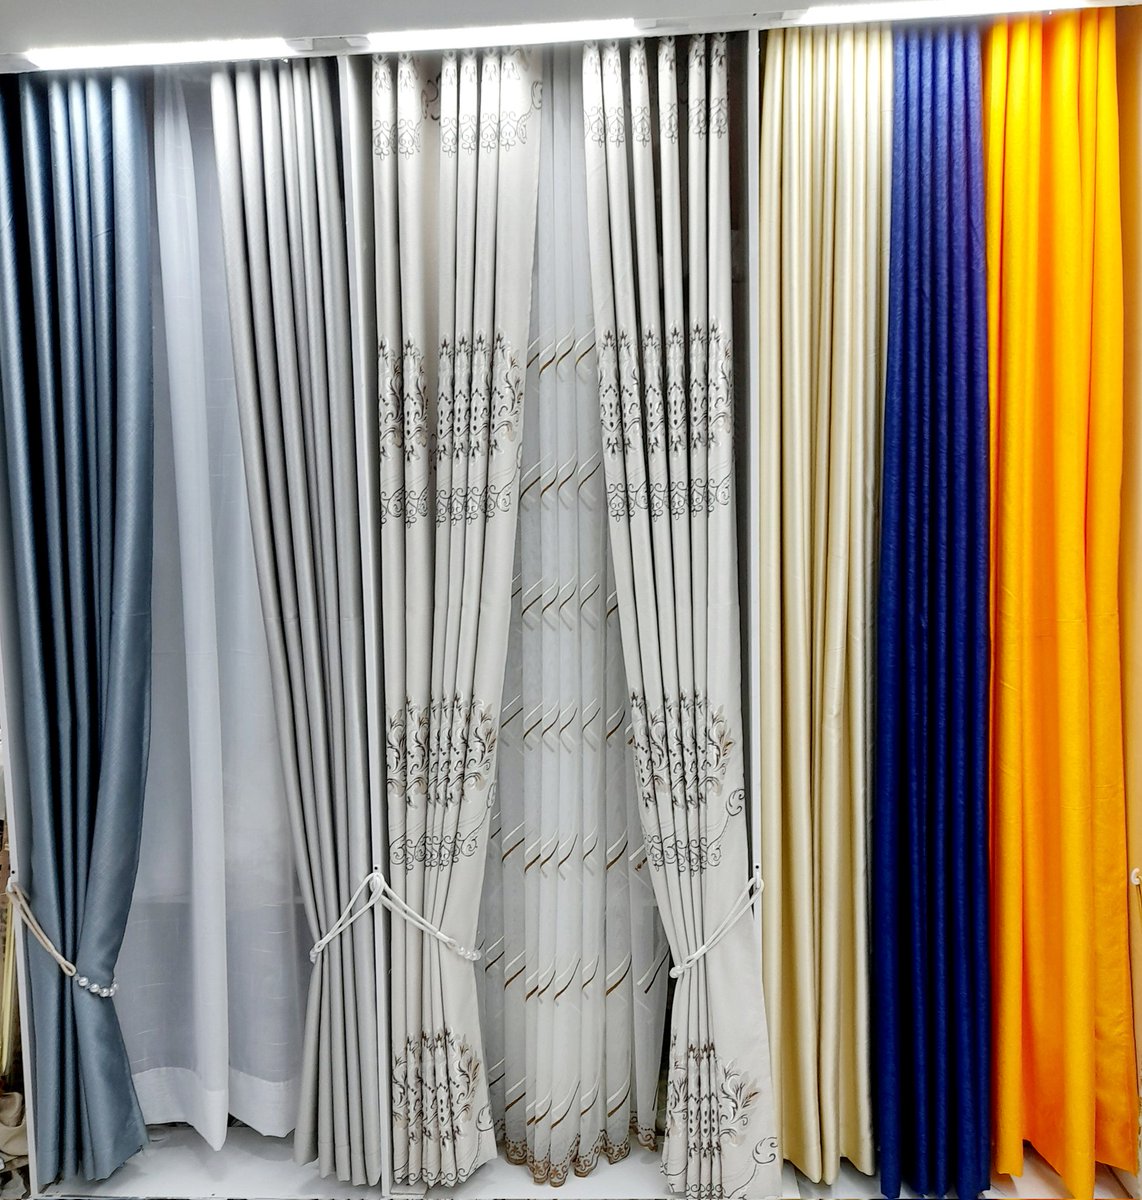 We have the best curtains for your interiors...make your order now.